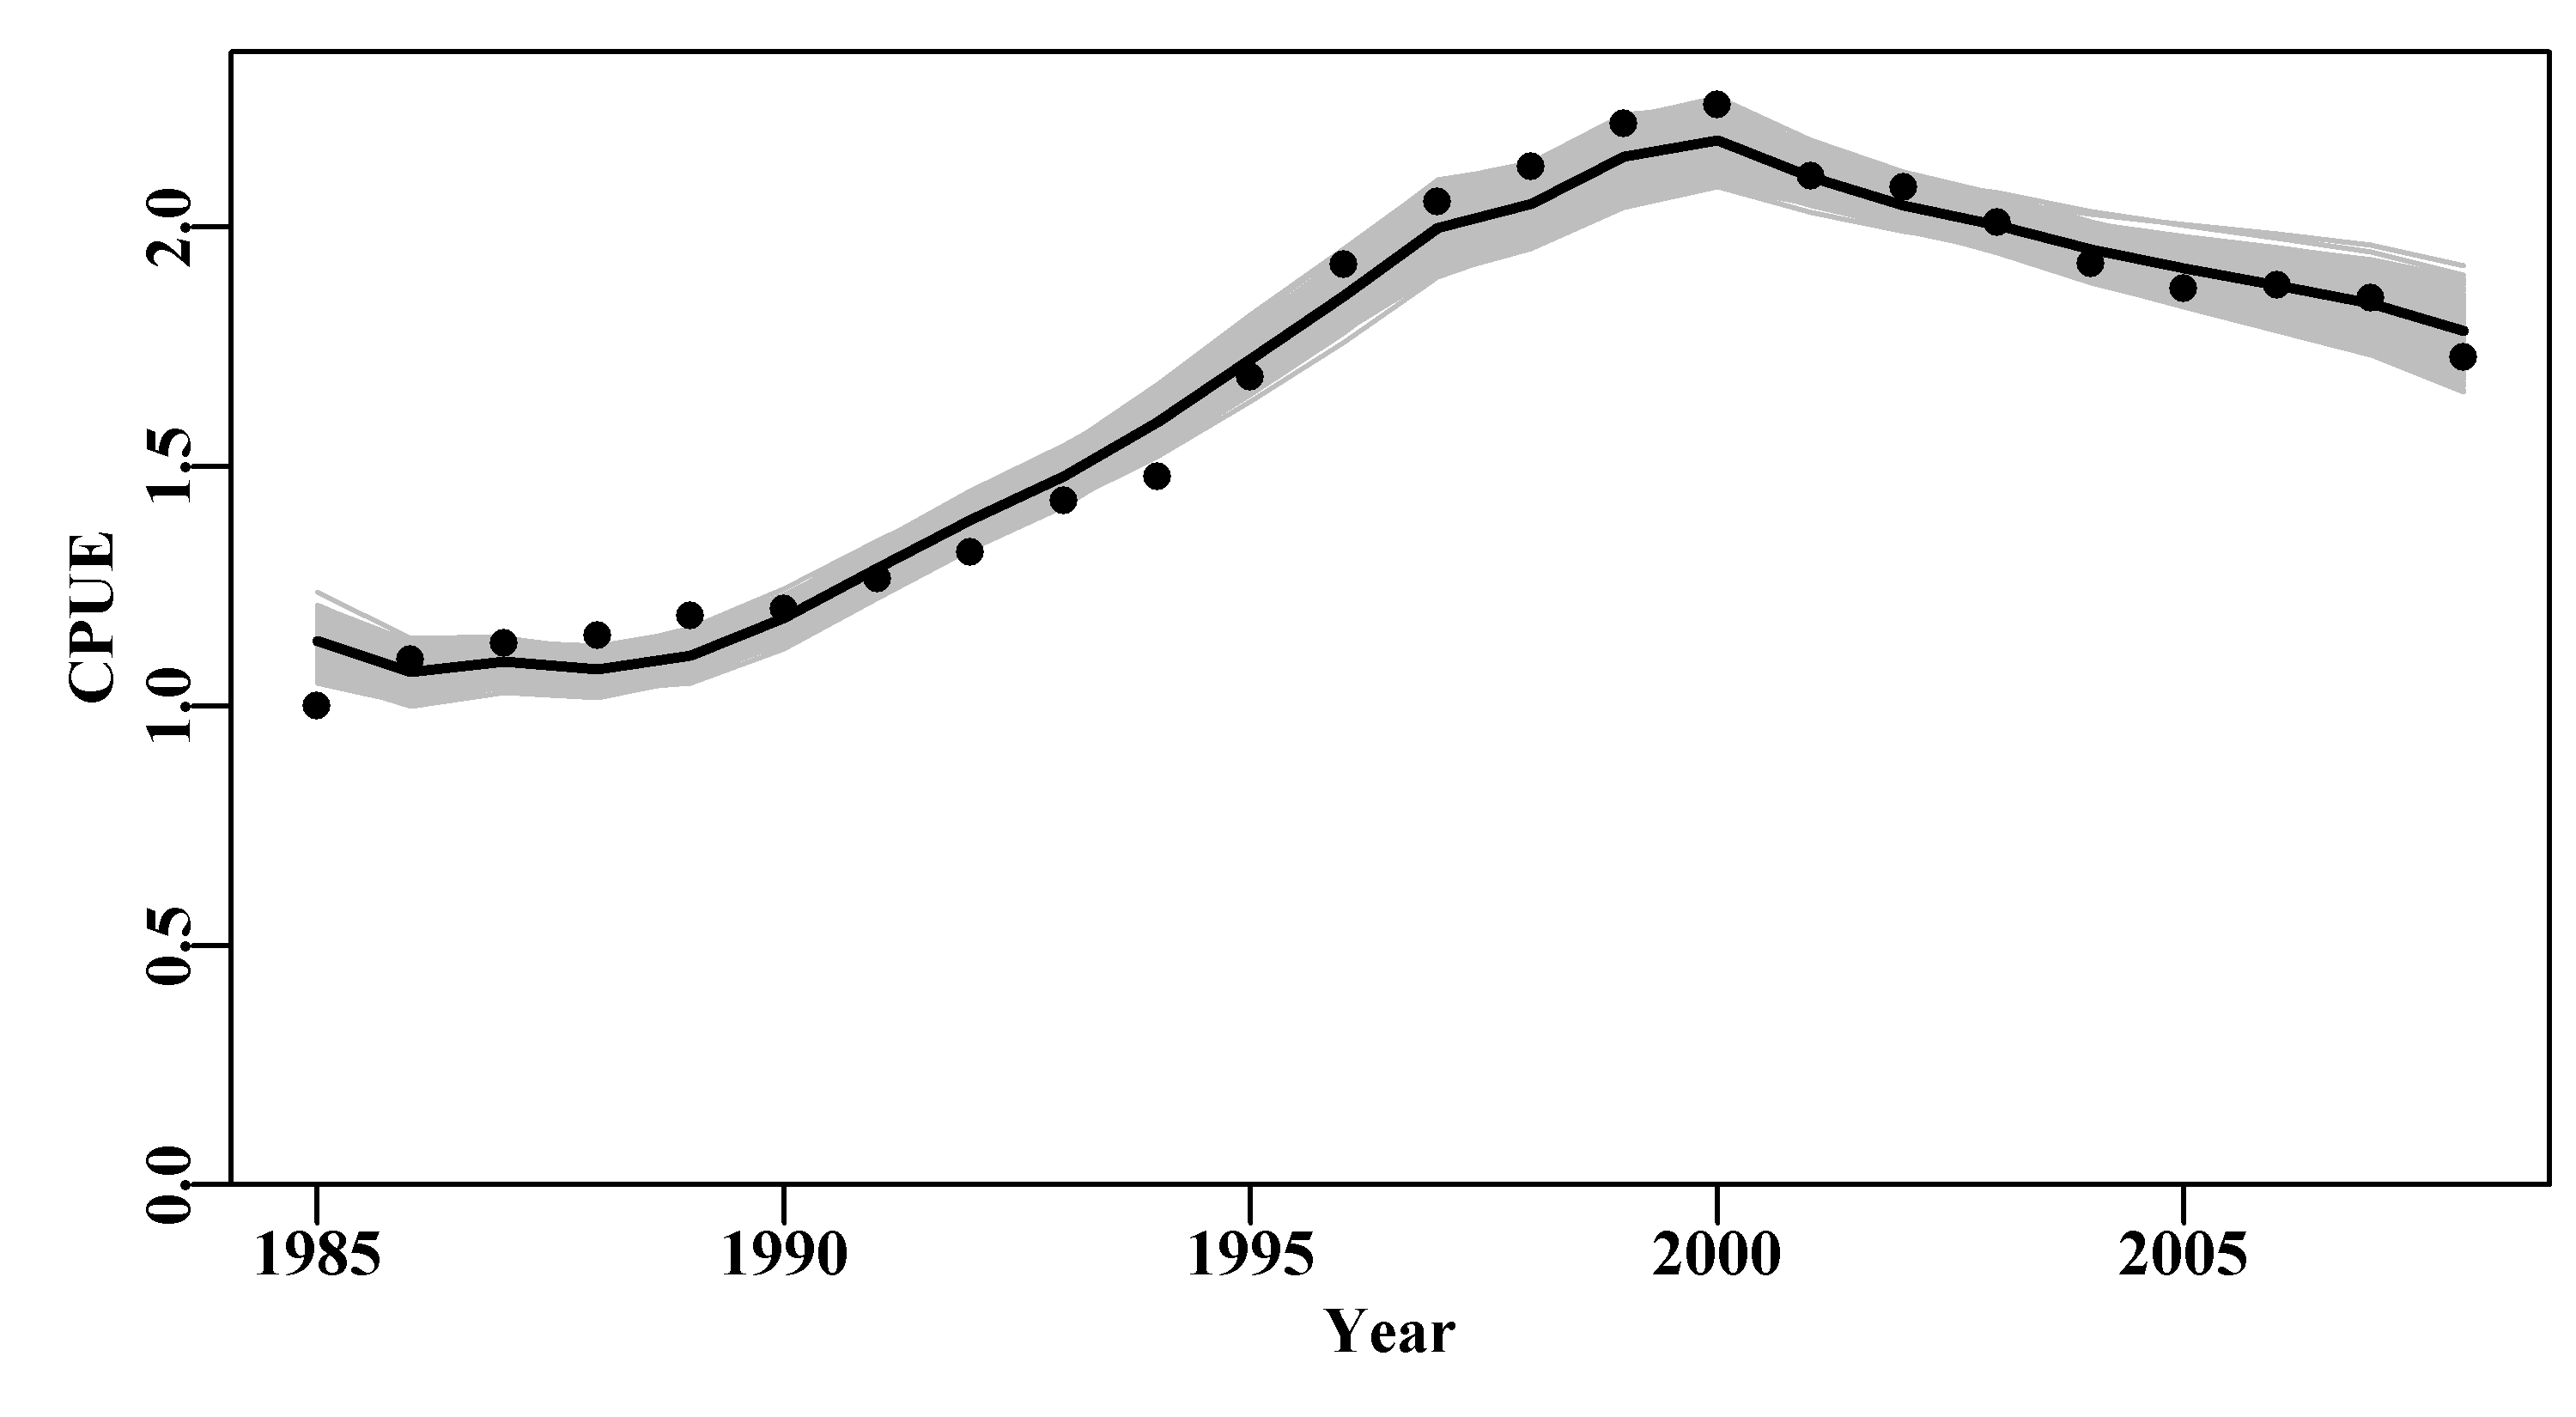 1000 bootstrap estimates of the optimum predicted cpue from the abdat data set for an abalone fishery. Black points are the original data, the black line is the optimum predicted cpue from the original model fit, and the grey trajectories are the 1000 bootstrap estimates of the predicted cpue.